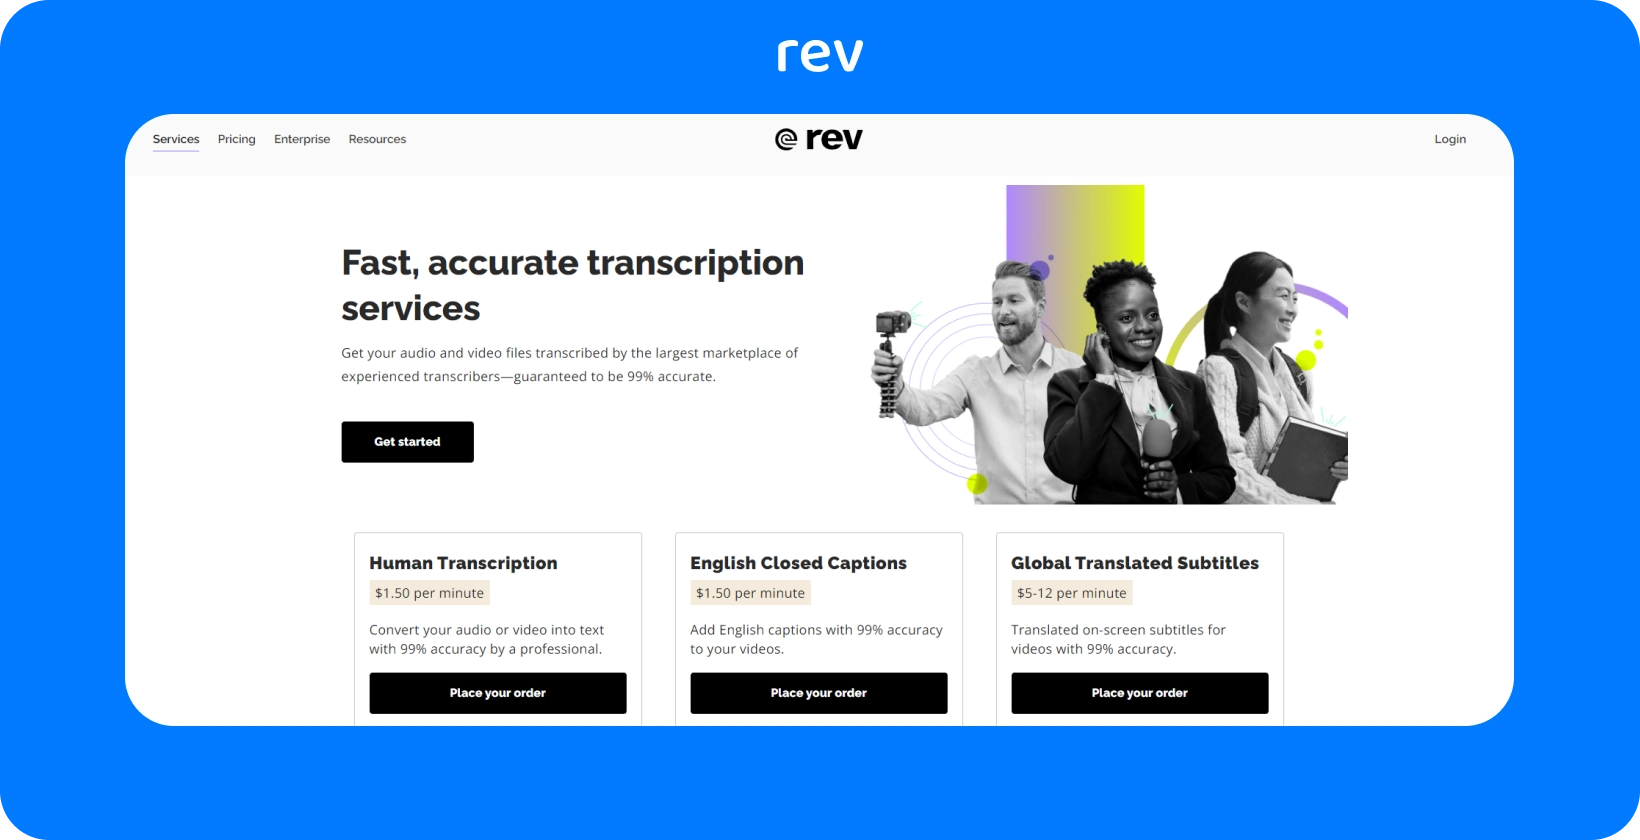 Rev's homepage highlights fast, accurate transcription services by professionals, with a 99% accuracy guarantee.